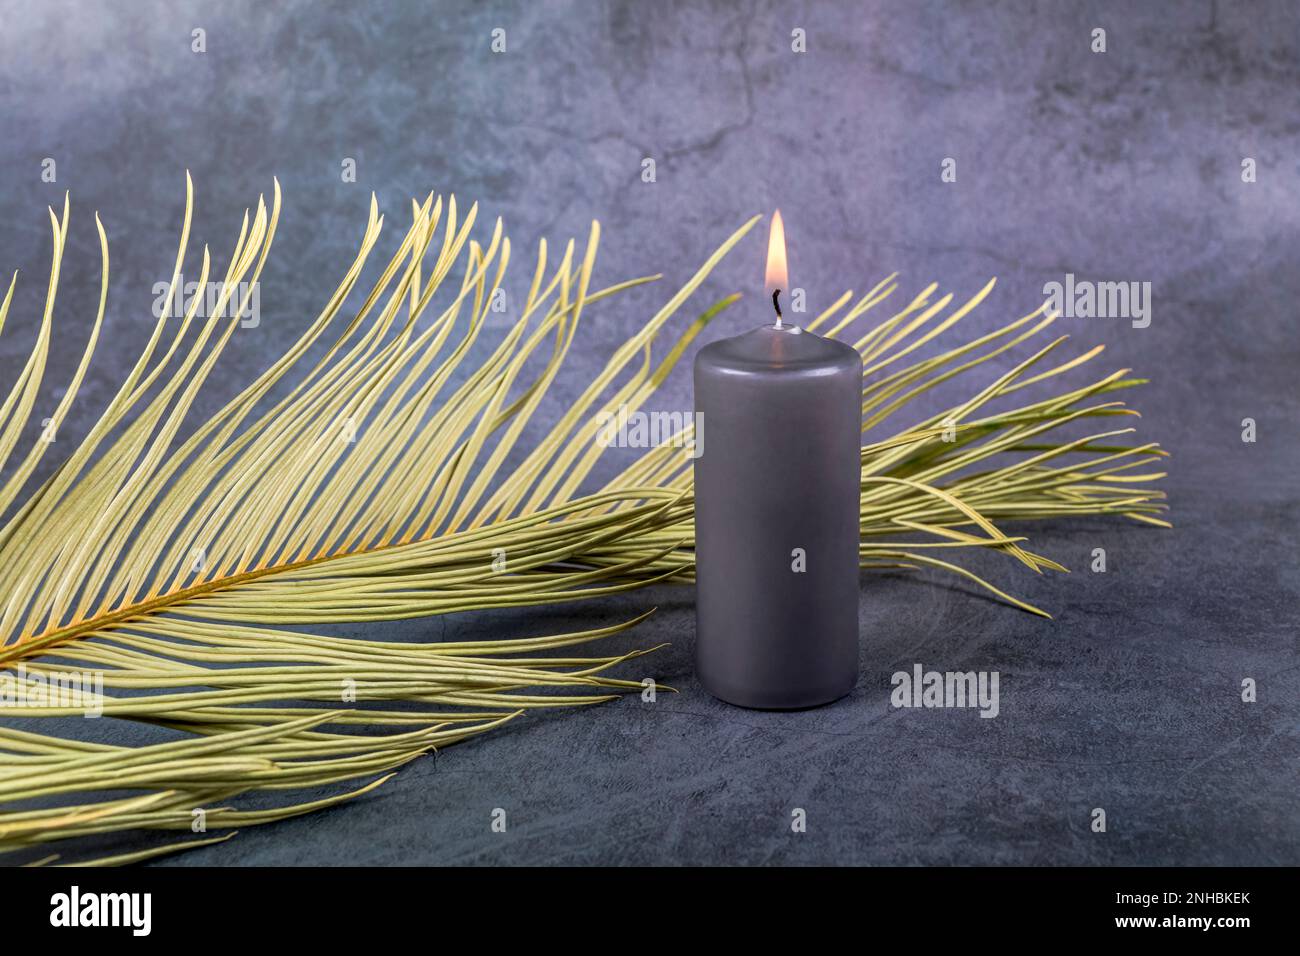 Palm leaf and burning candle. Ash Wednesday, Lent season, Holy Week, Good Friday and Palm Sunday concept. Copy space. Stock Photo